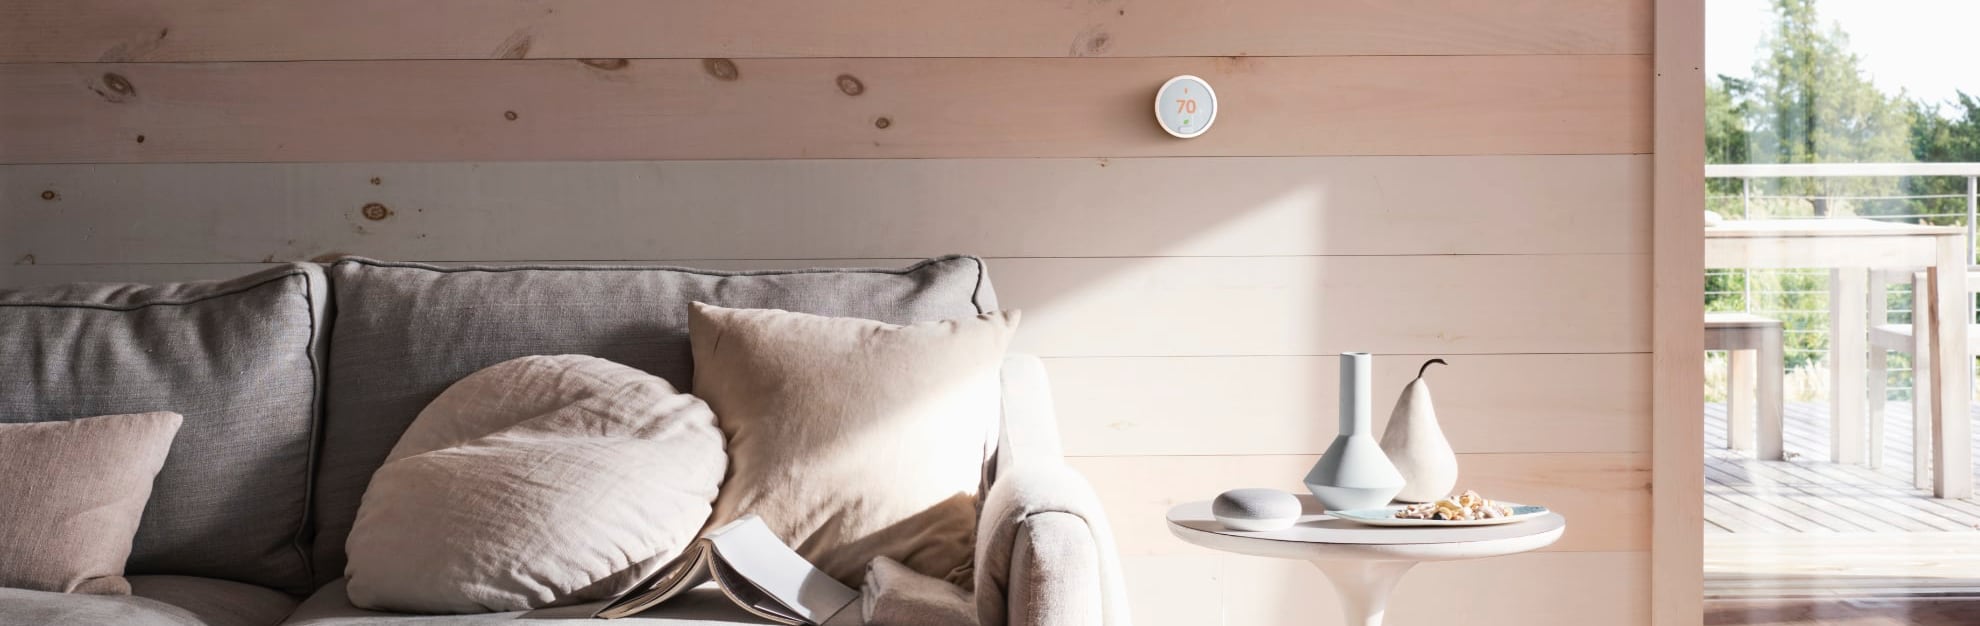 Vivint Home Automation in Springfield